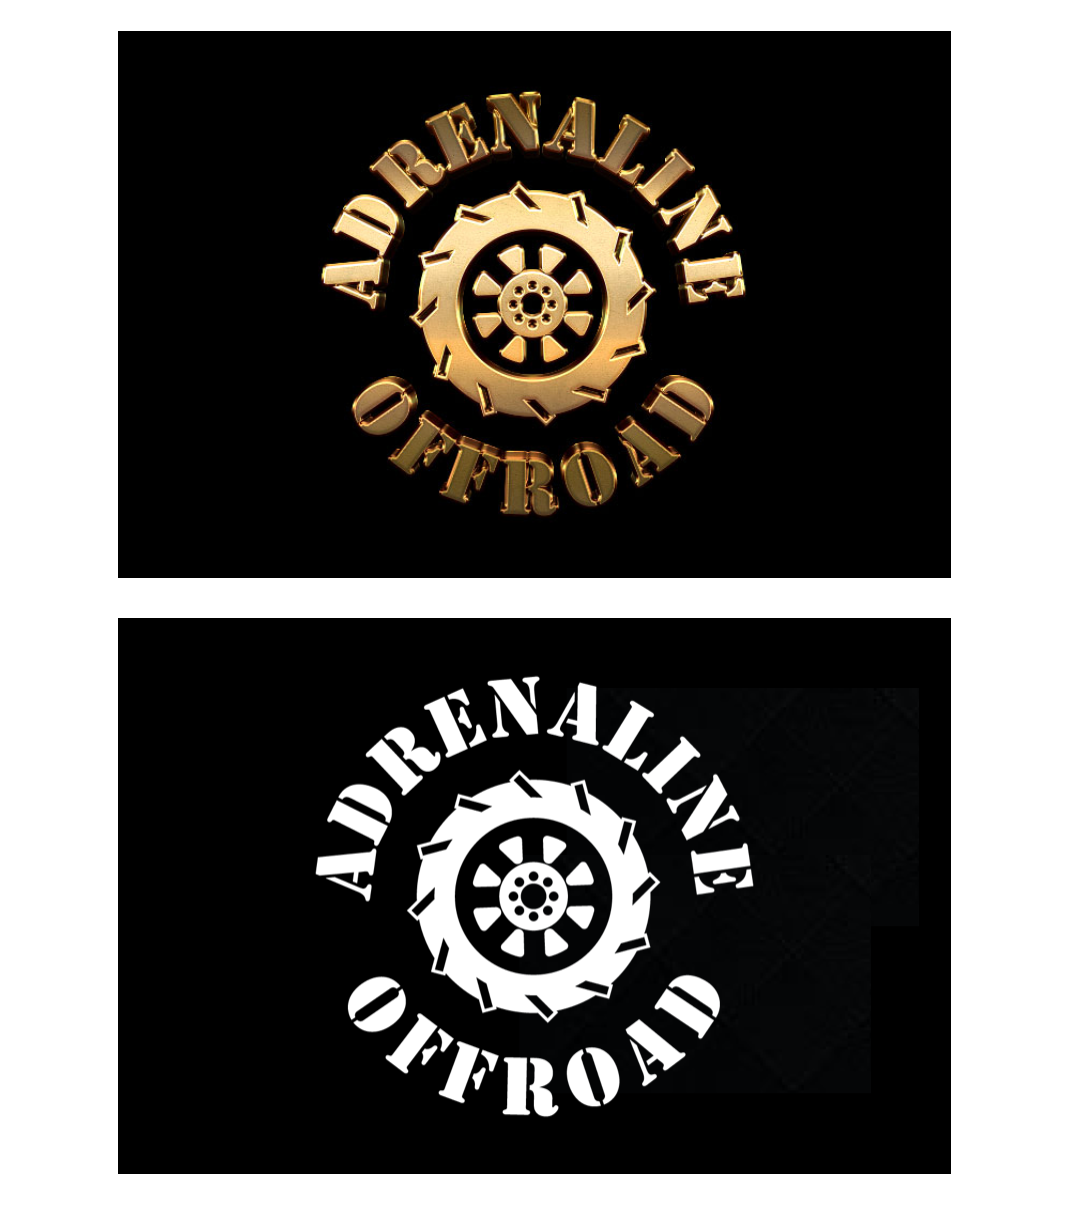 Adrenaline Offroad 3x5' Flag - Adrenaline Offroad Outfitters